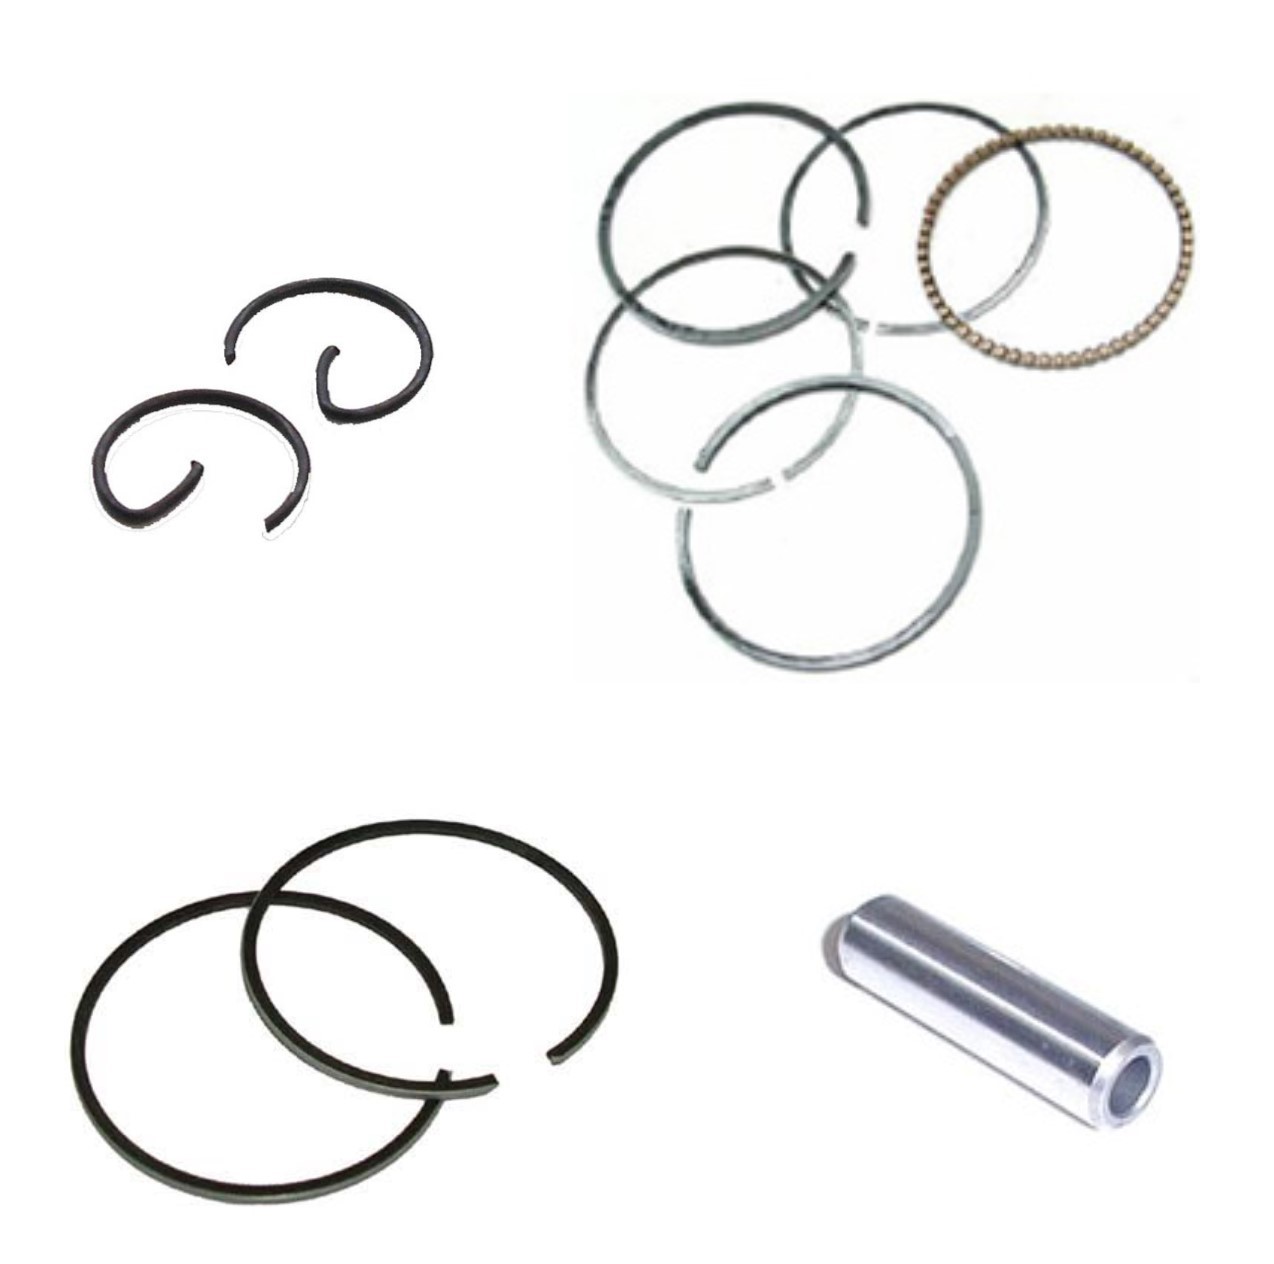 Piston Rings (2 and 4 Stroke) Honda Type,GY6,QMB,Jog,+More For 40-300cc Engines